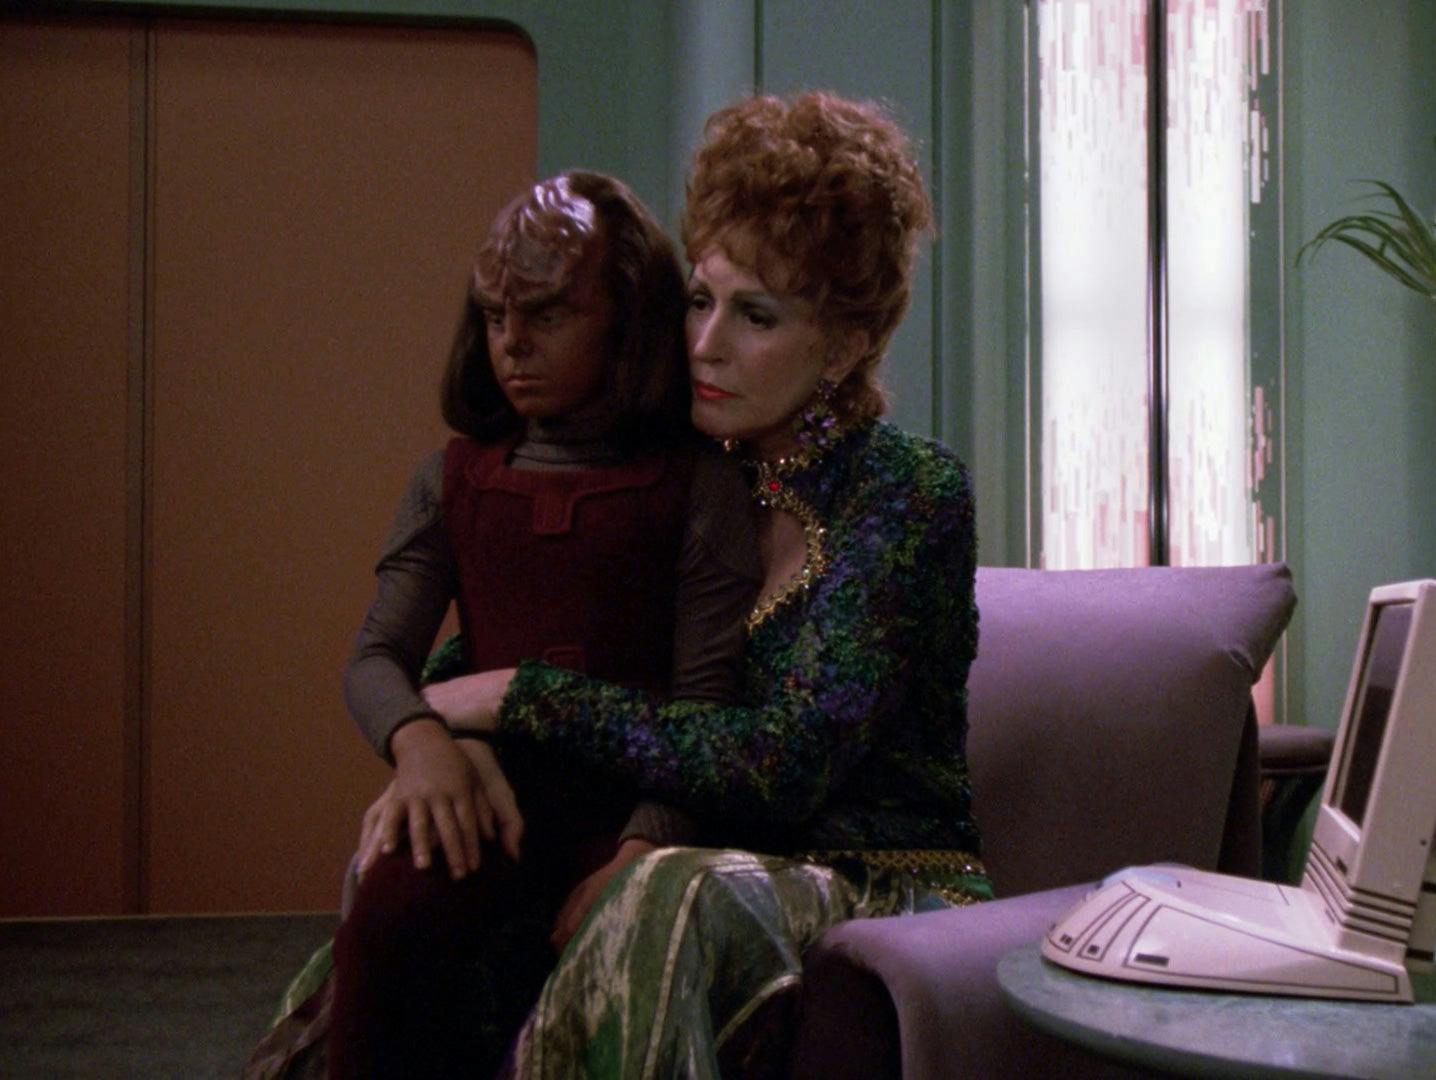 Lwaxana Troi comforts Alexander Rozhenko who sits on her lap while they both of solemn expressions on their faces in 'Cost of Living'